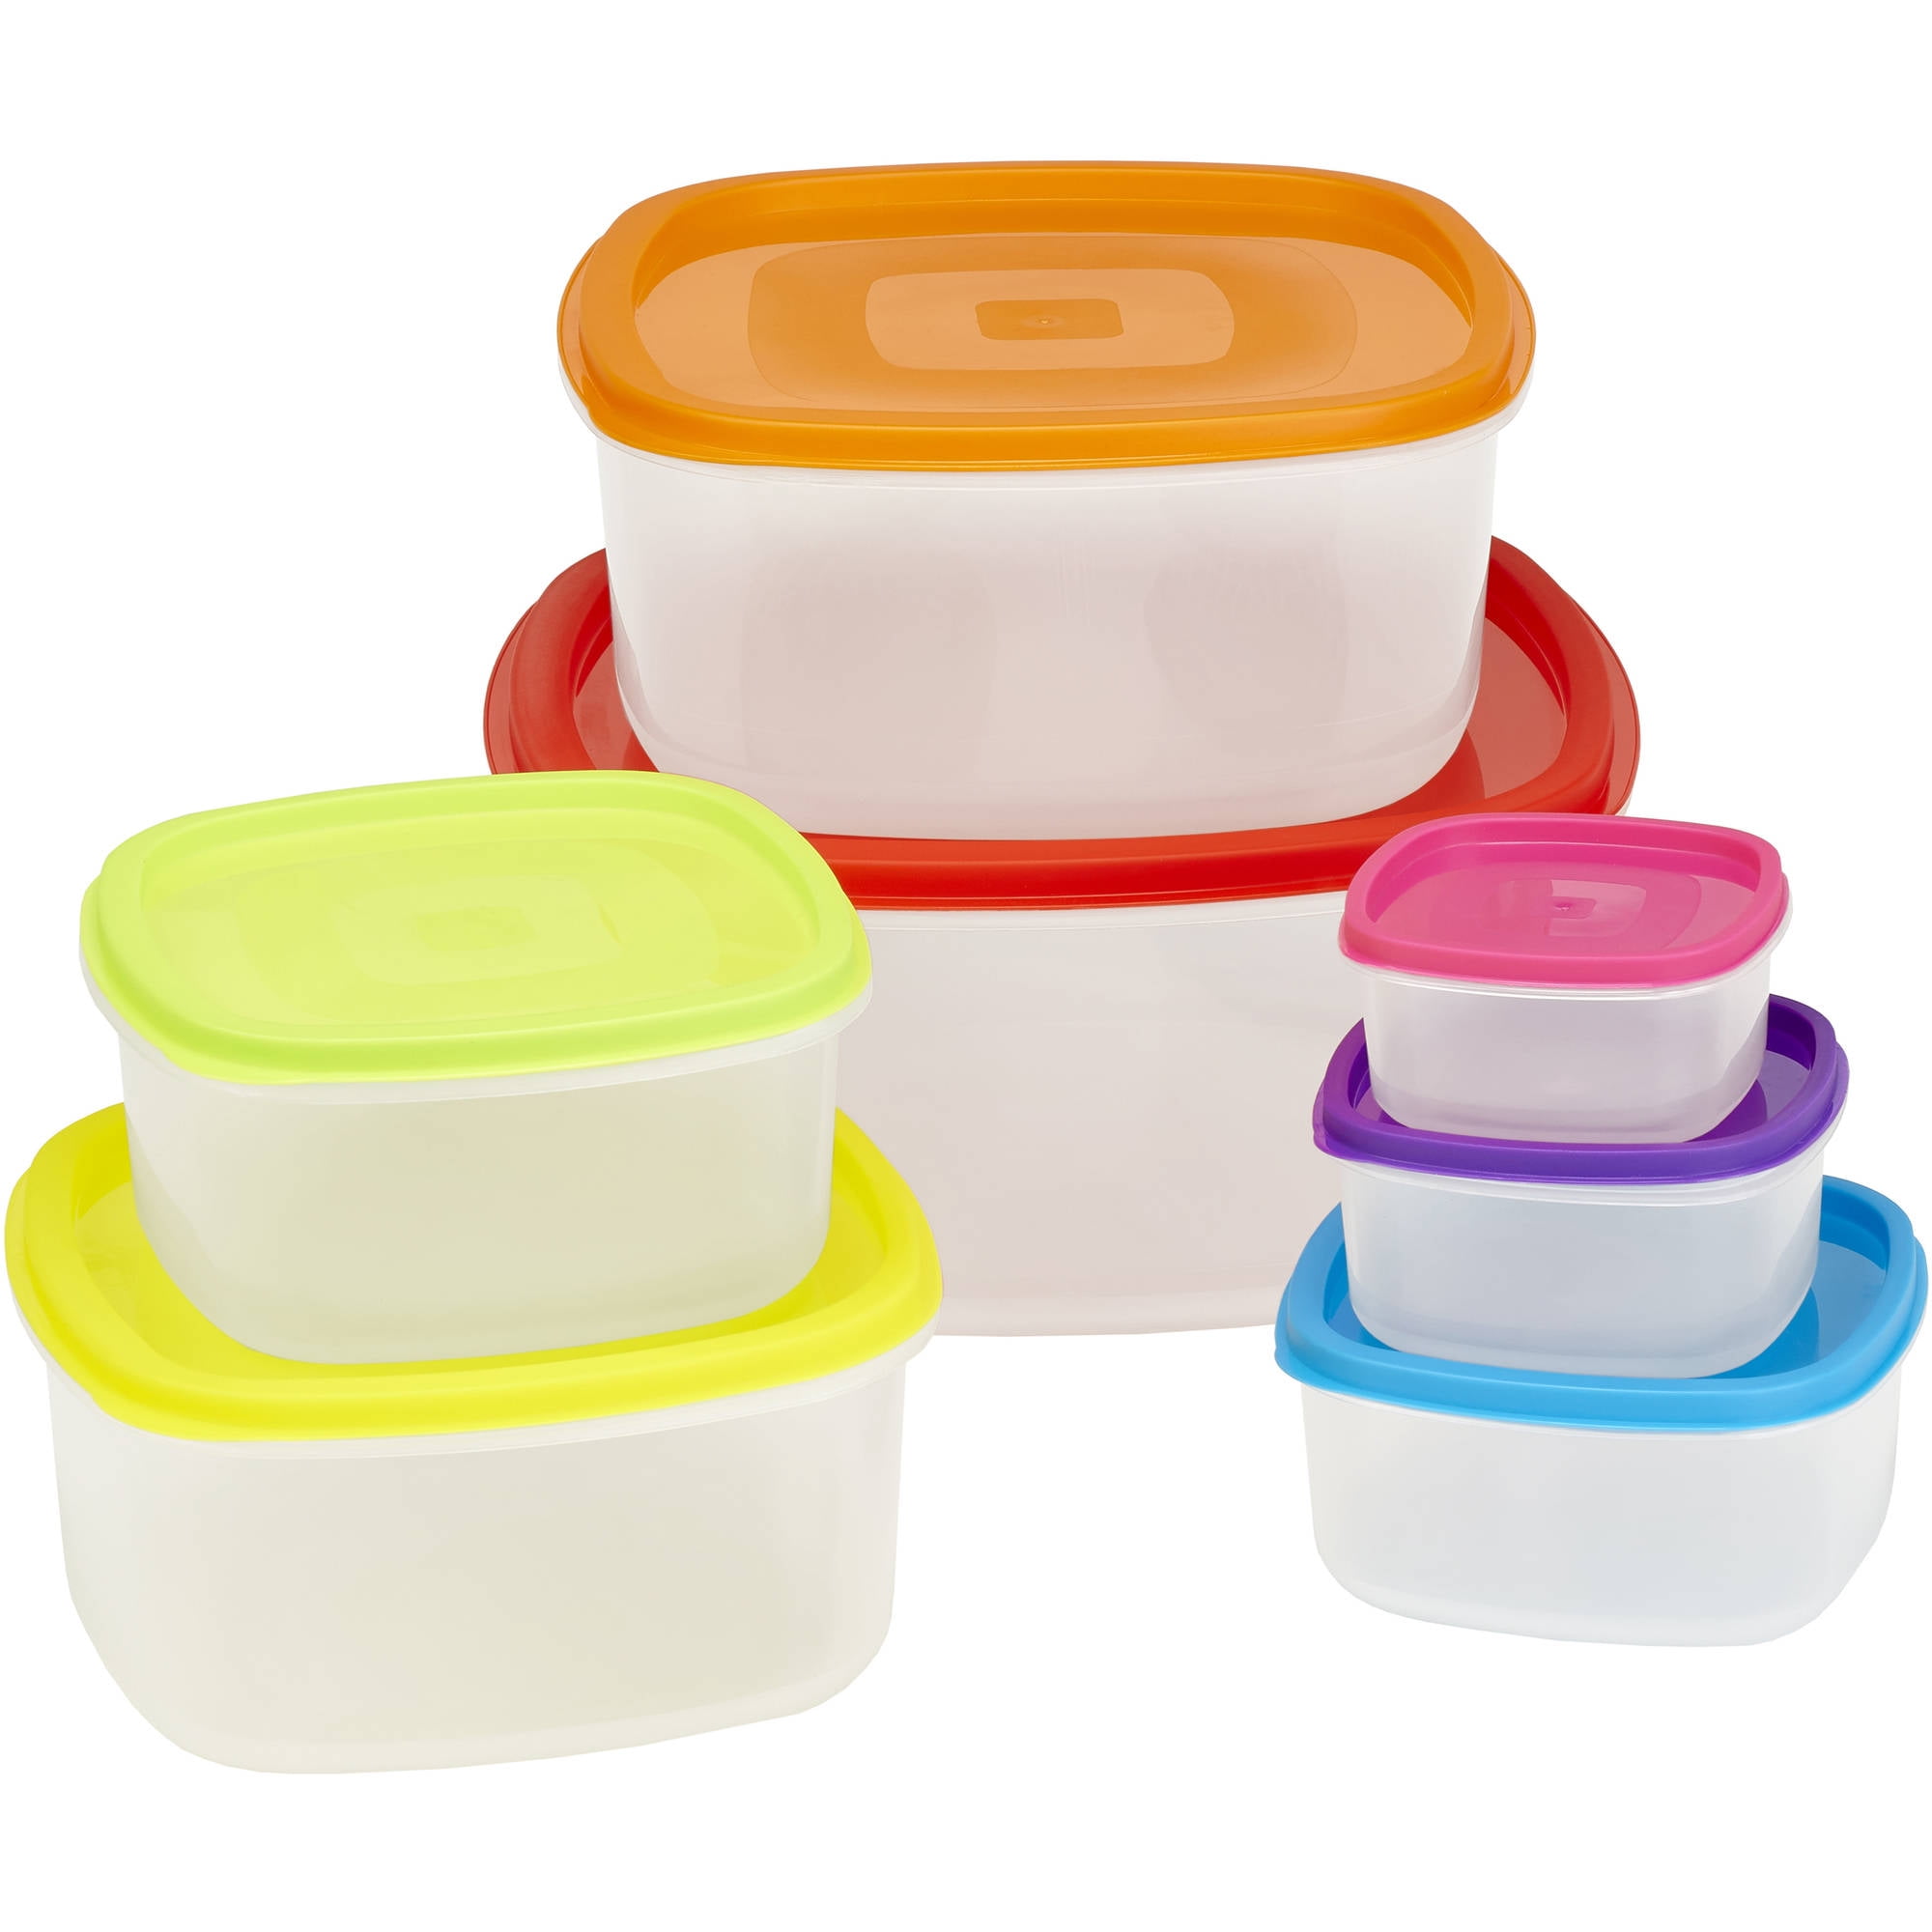 Holiday Home Nested Food Storage Set - 4 pc, 4 pc - Kroger